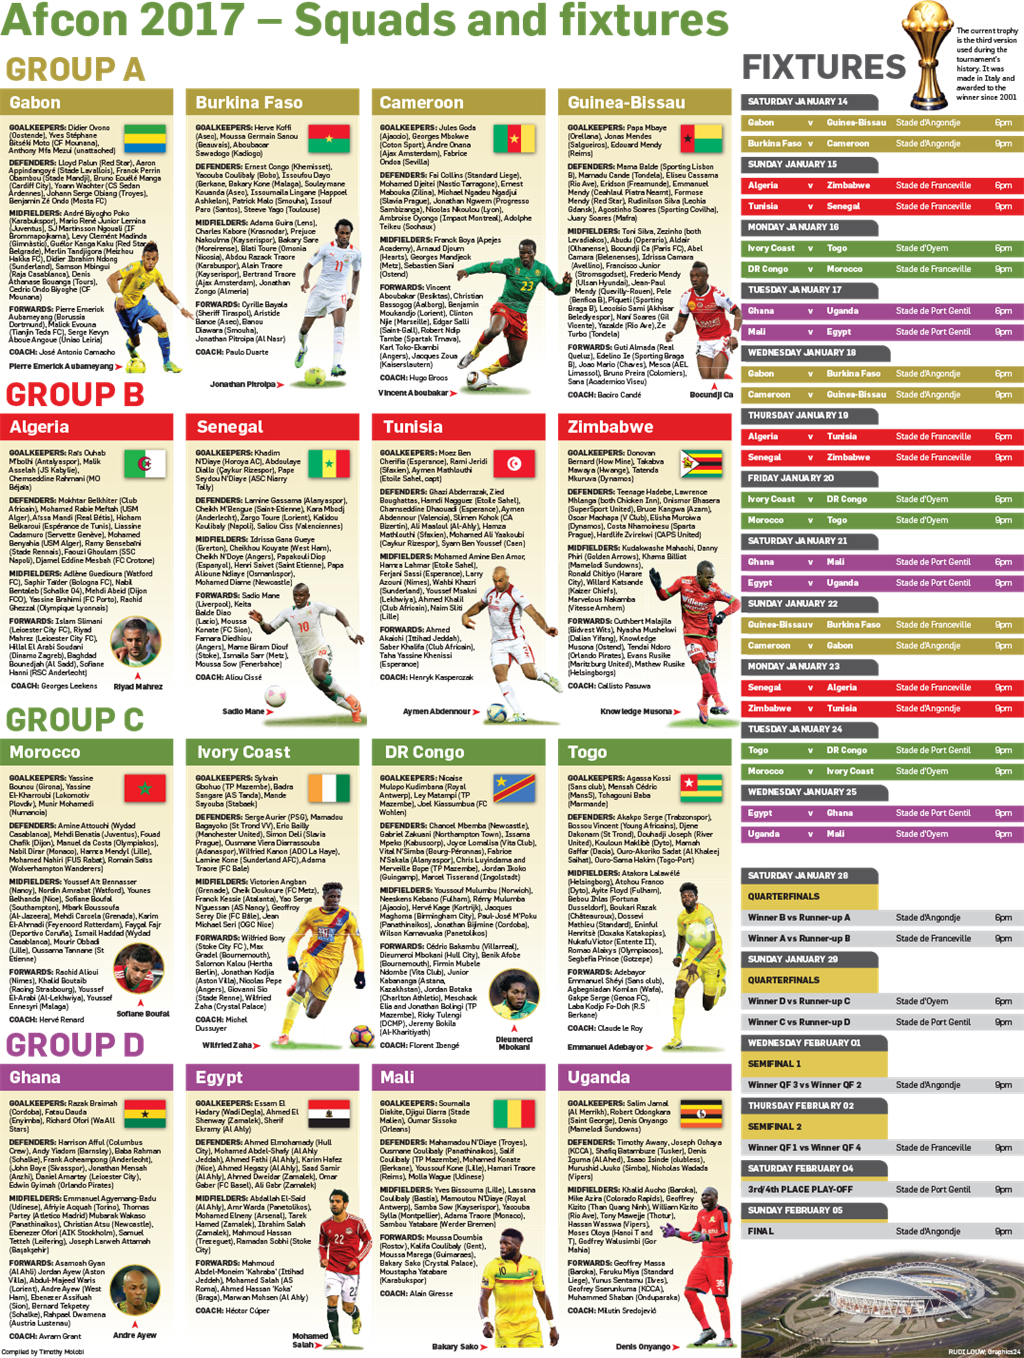 GRAPHIC: AFCON 2017 - squads and fixtures | Sport24